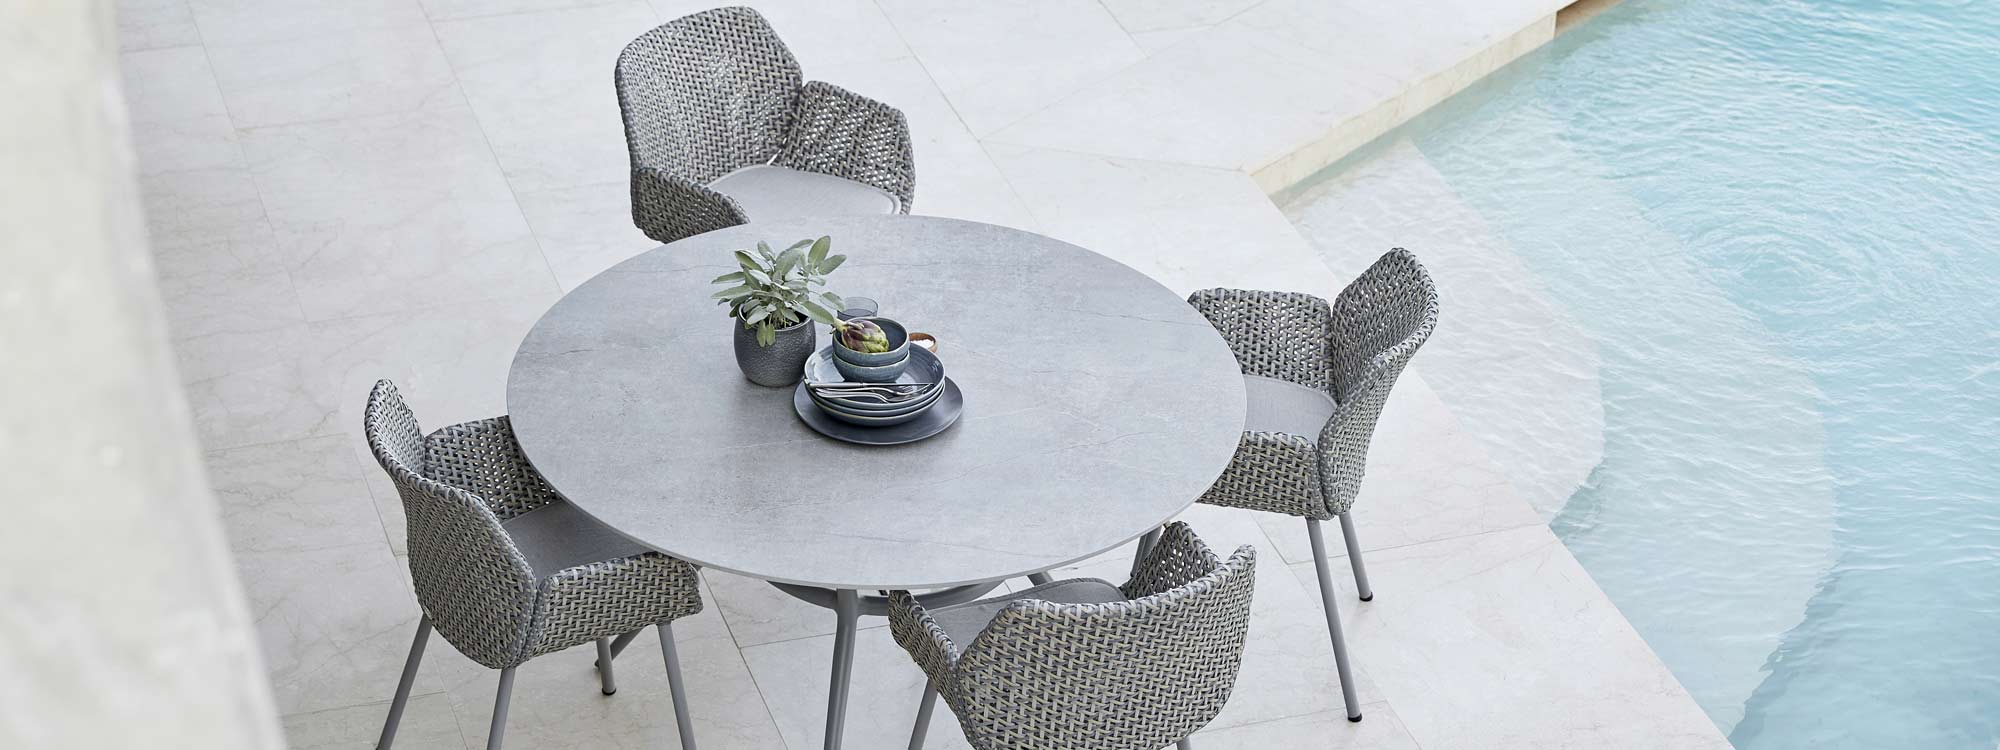 Joy garden table is a modern outdoor dining table - circular or rectangular garden table in high quality outdoor furniture materials by Cane-line furniture